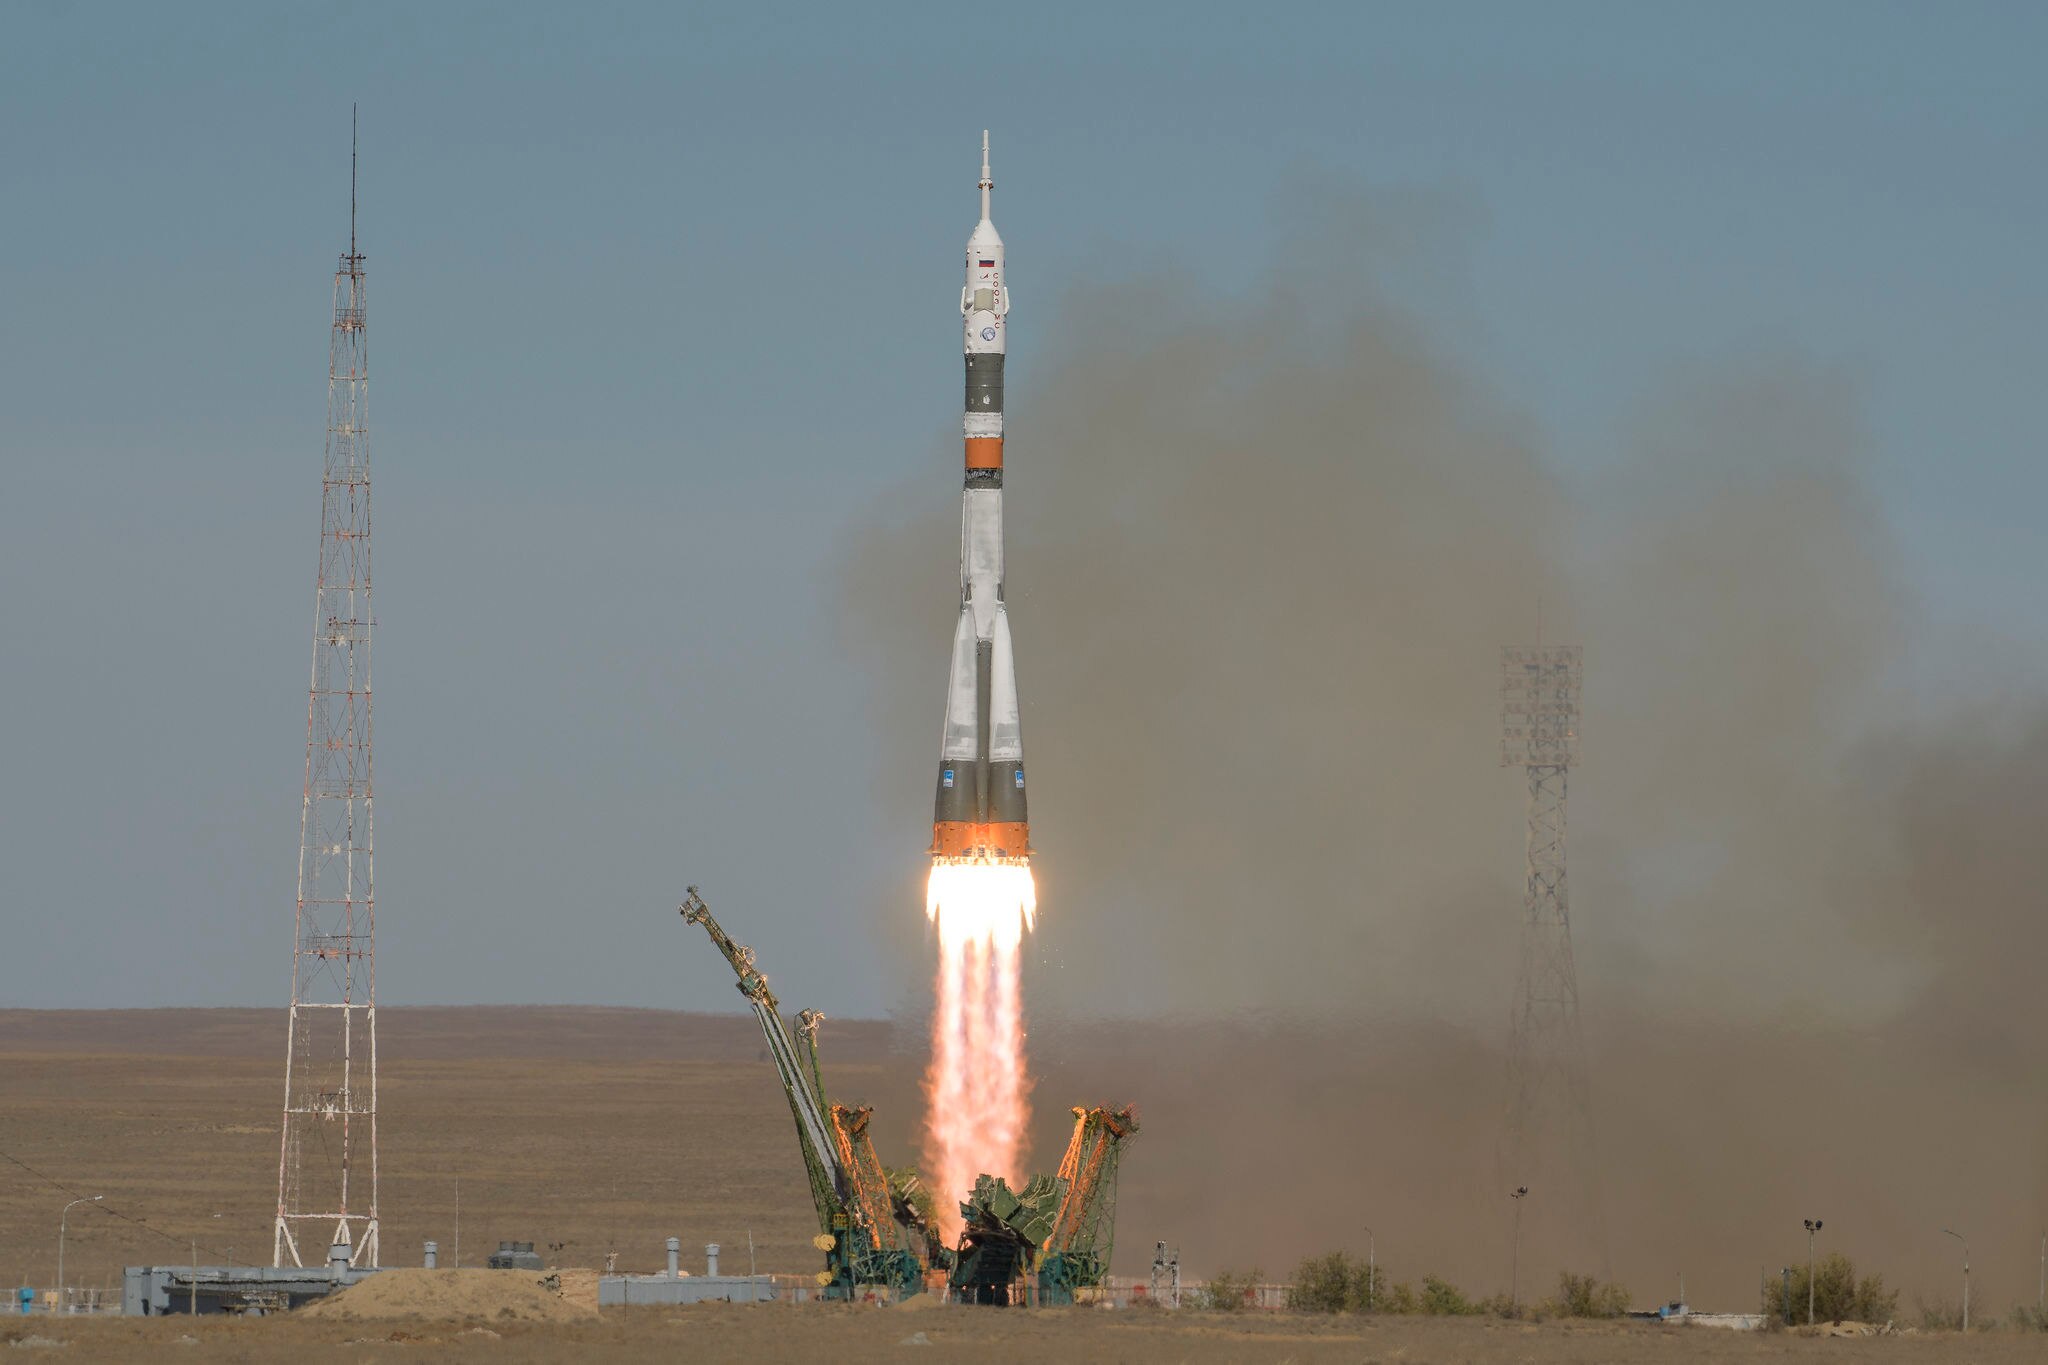 The launch of the Russian Soyuz rocket with two humans on board bound for the ISS on October 11, 2018. Two minutes into the flight a rocket failure forced the emergency landing of the capsule and crew. Credit: NASA/Bill Ingalls